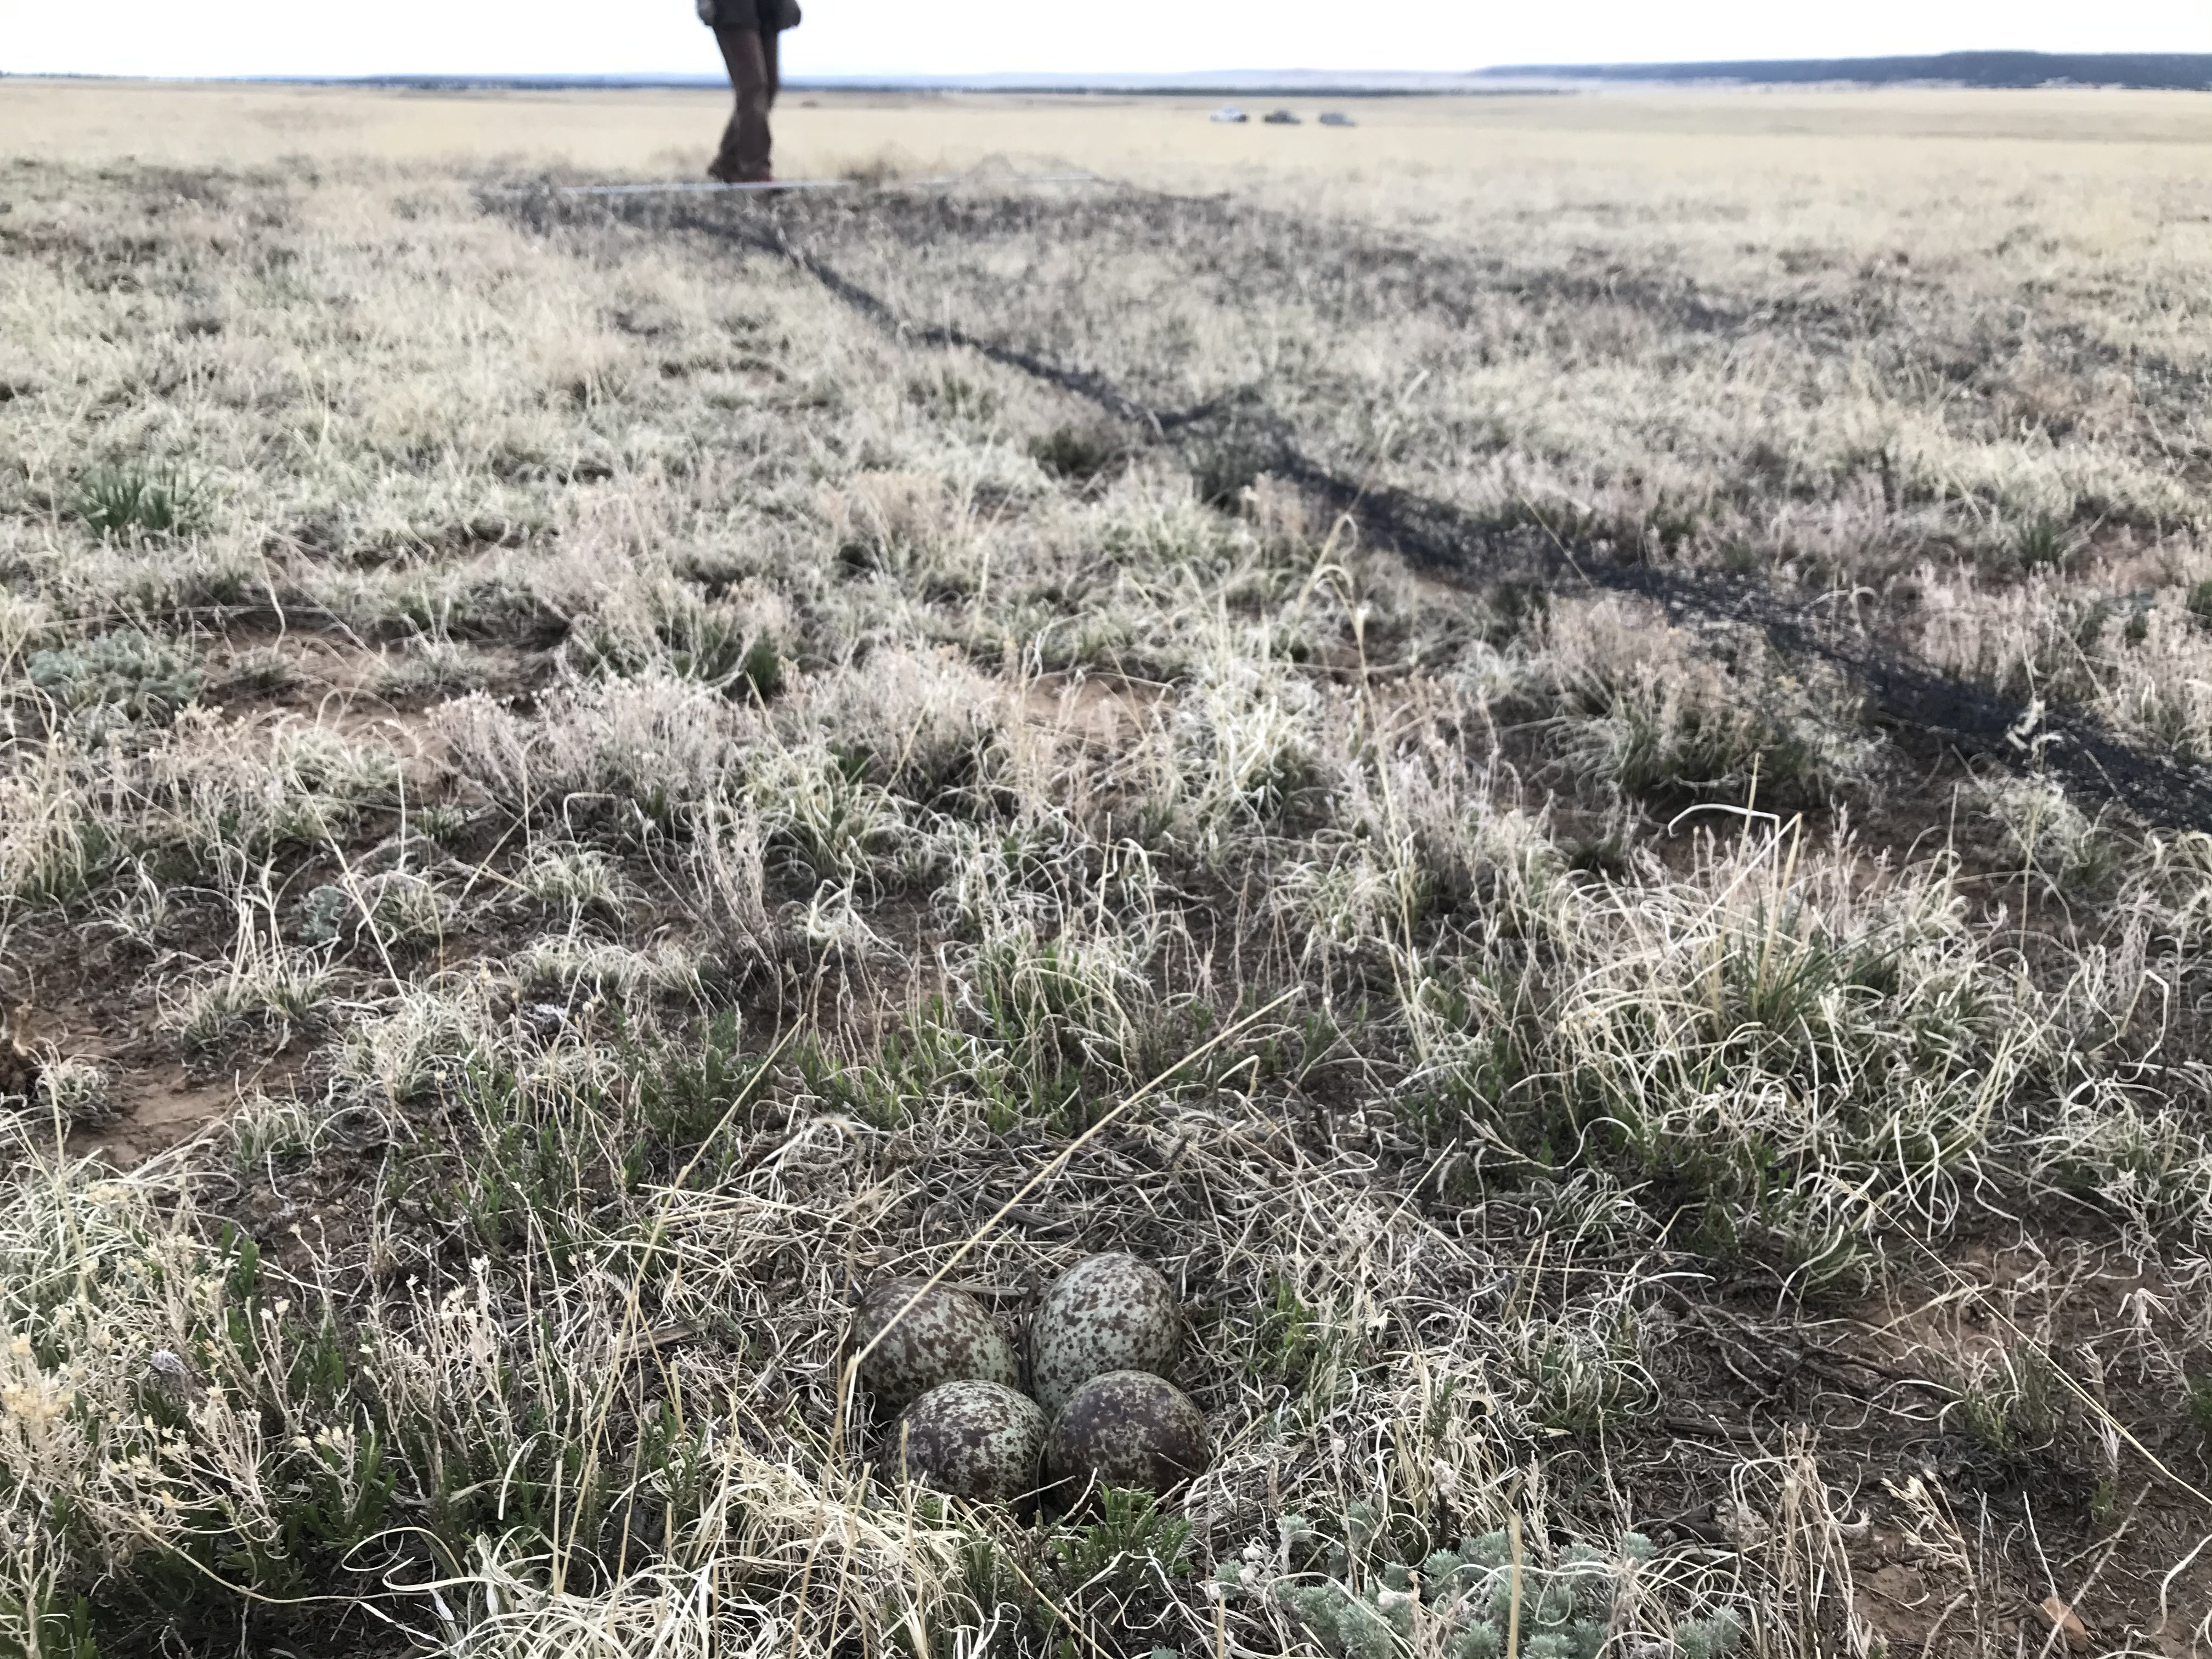 In short grass, a Long-billed curlew nest with four eggs is centered in the image. A delicate mesh net lies on the ground inches away. In the background there is a person at the end of the net and some distant parked vehicles.